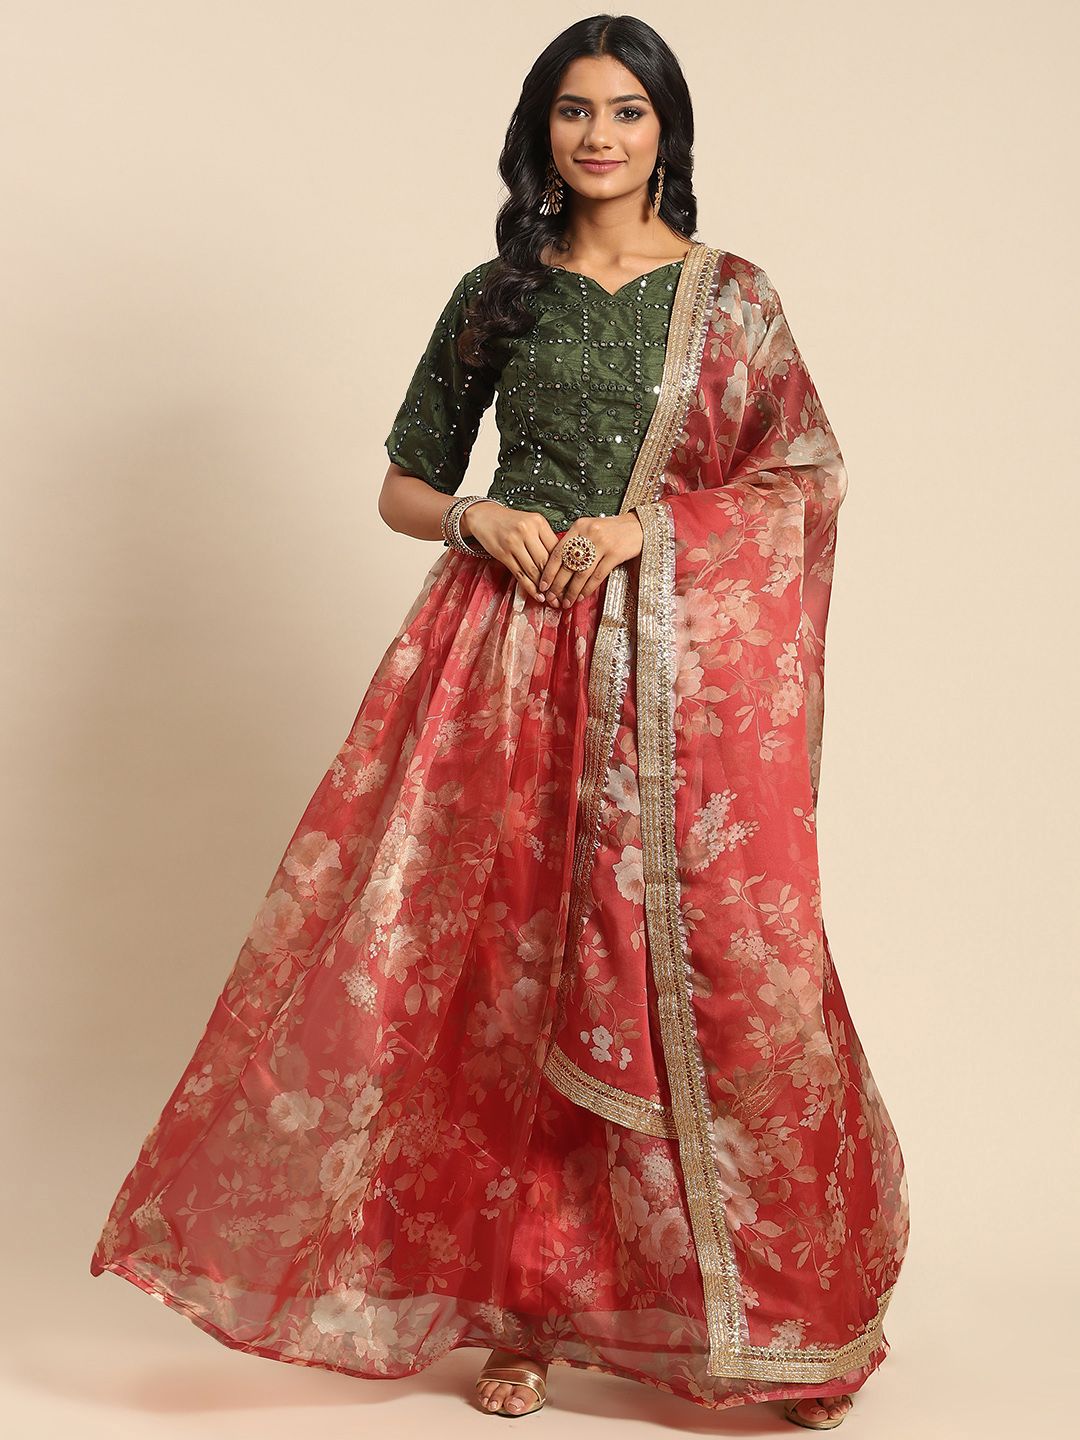 Tikhi Imli Red & Green Embellished Mirror Work Ready to Wear Lehenga & Semi-Stitched Blouse With Dupatta Price in India